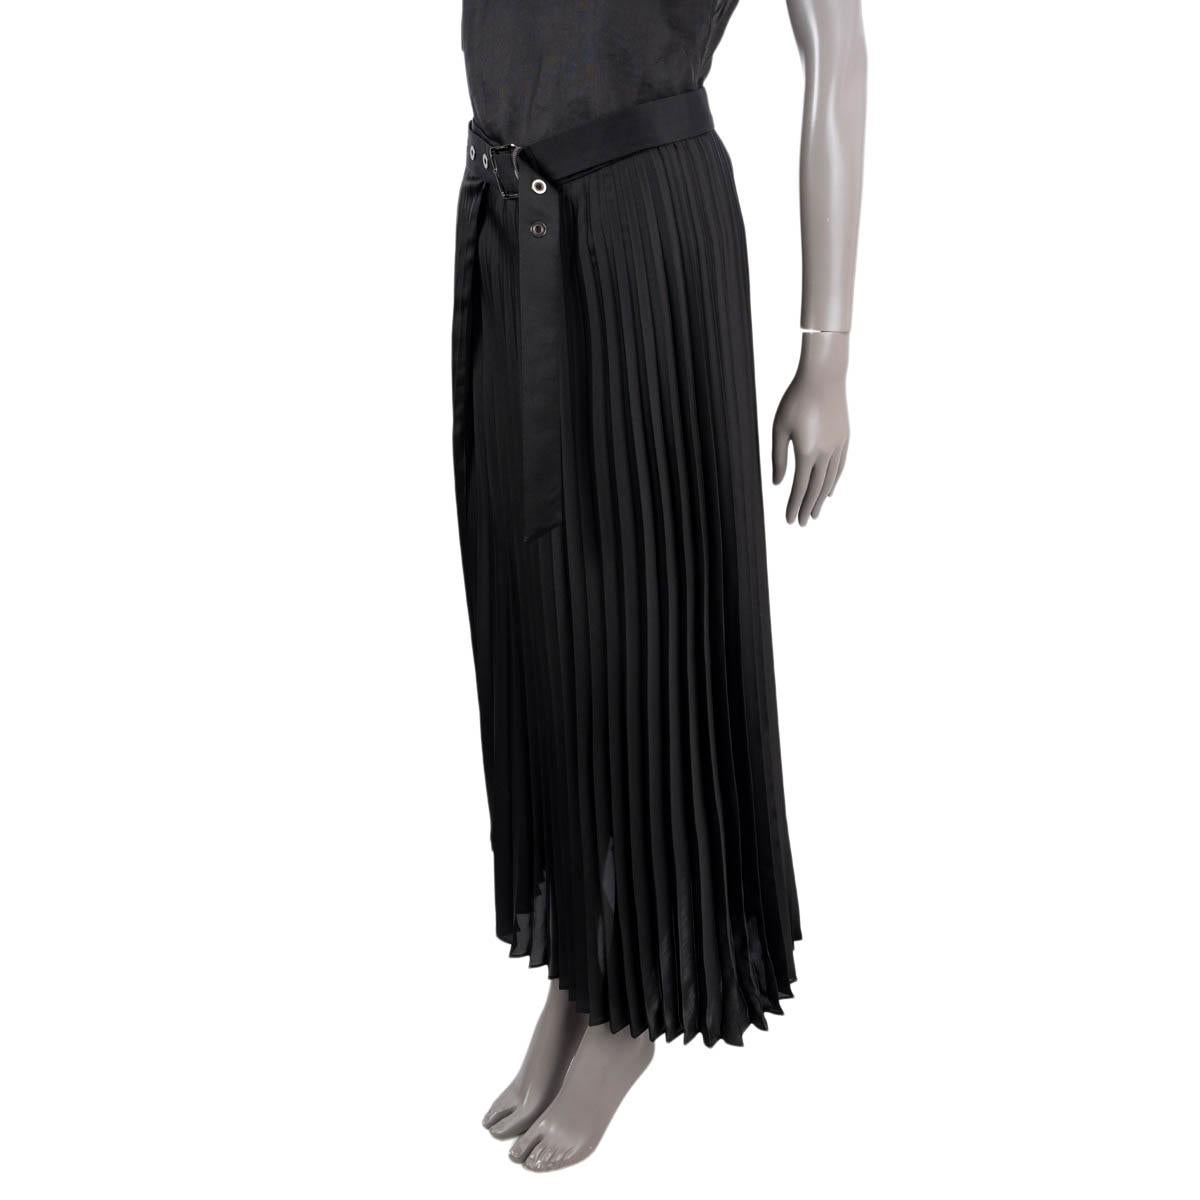 100% authentic Brunello Cucinelli pleated wrap Skirt in black polyester (100%). Features grommet belt at the waistband. Unlined. Has been worn and is in excellent condition.

Measurements
Tag Size	42
Size	M
Waist From	115cm (44.9in)
Hips From	104cm